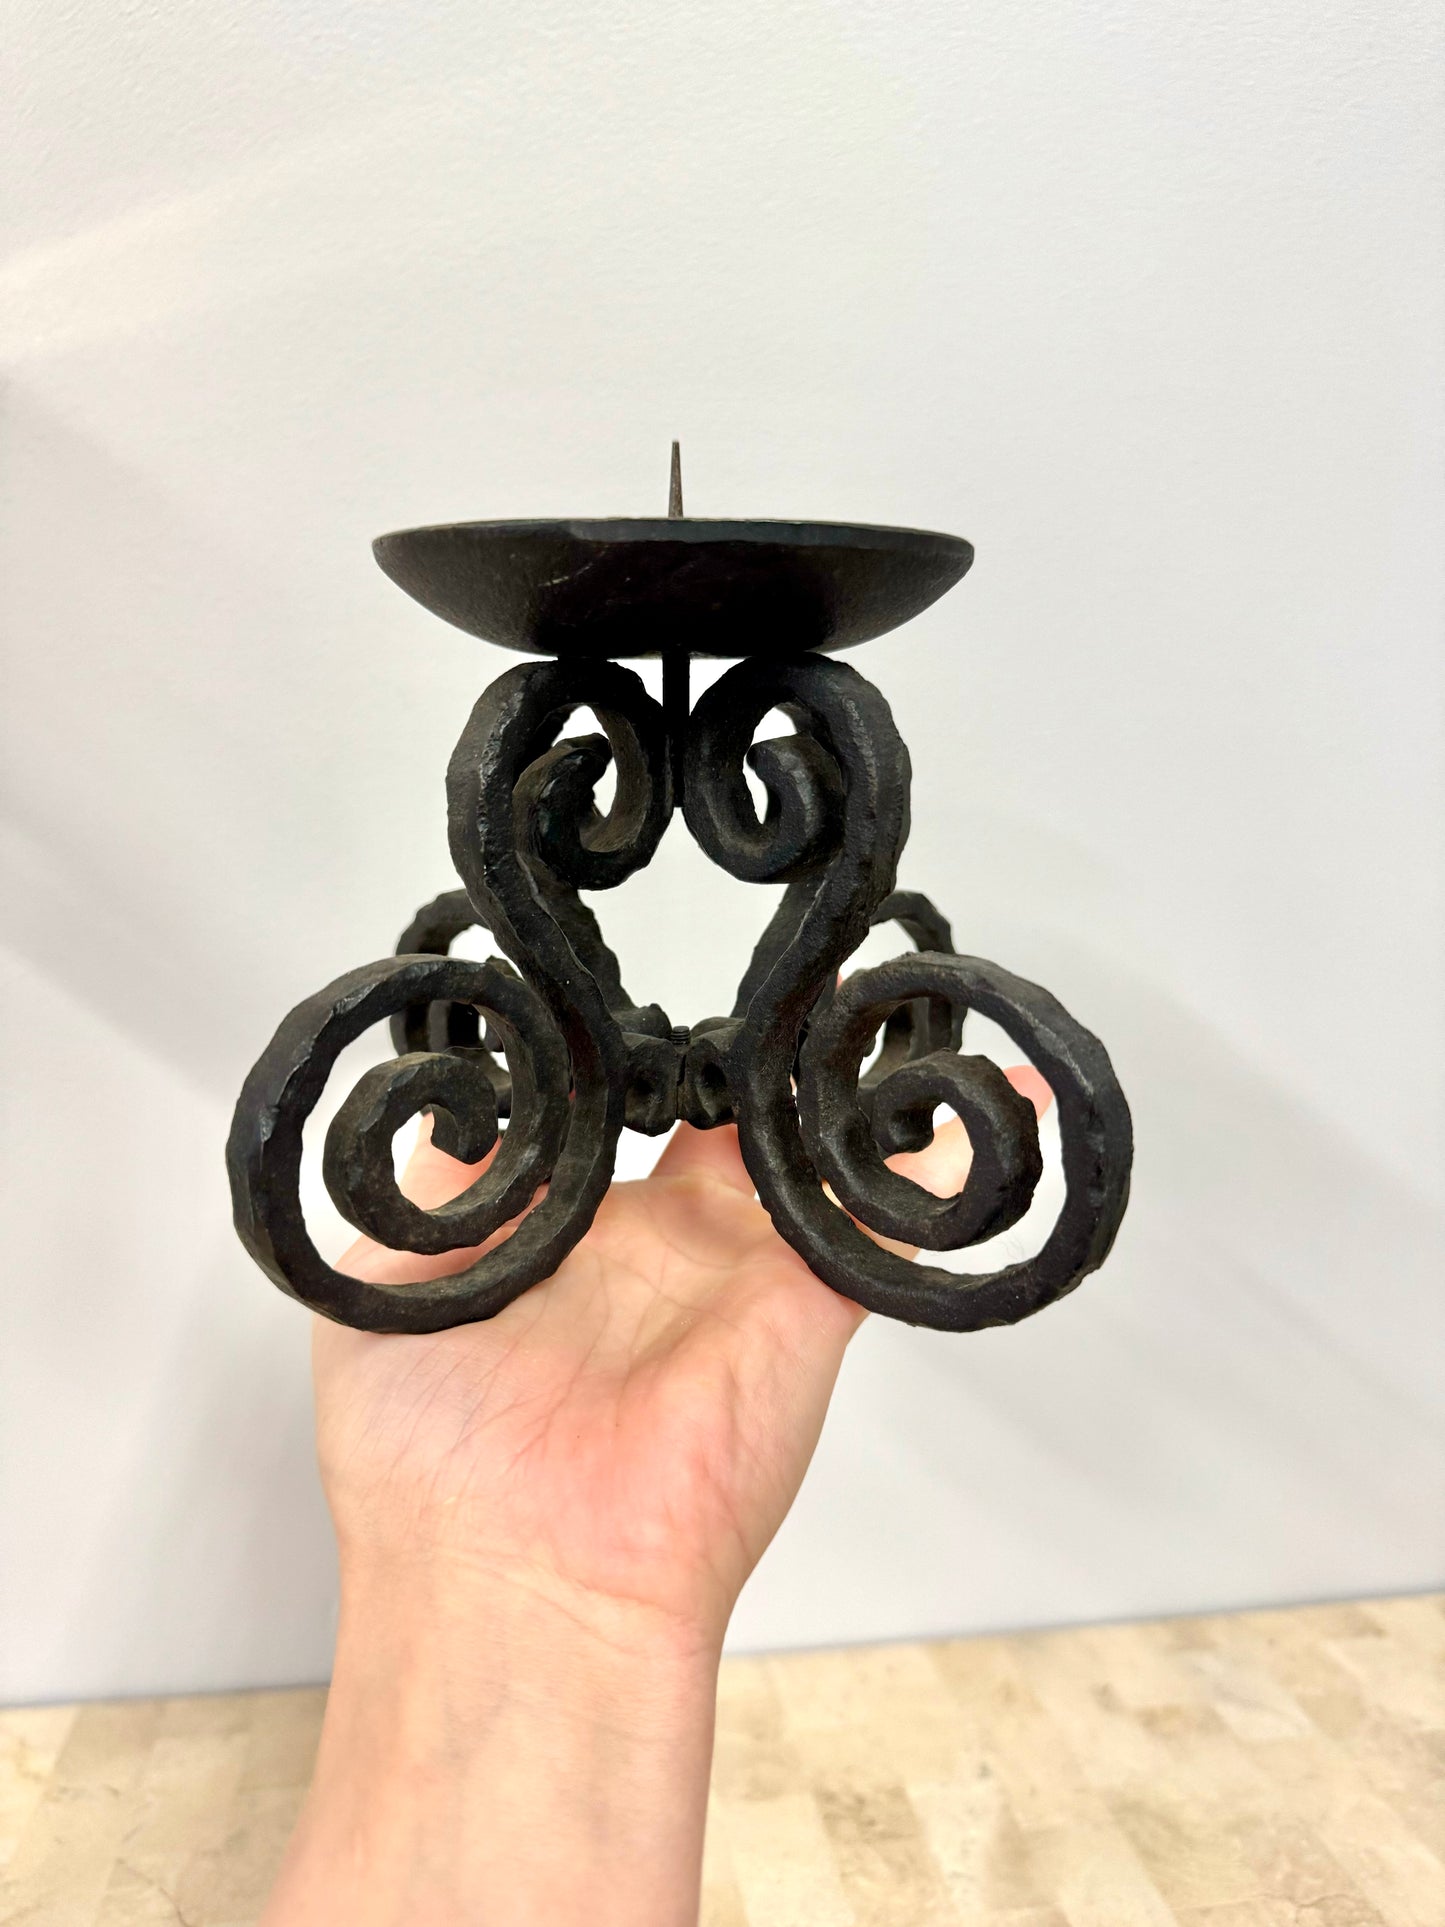 Vintage Rustic Wrought Iron Pillar Candle Holder